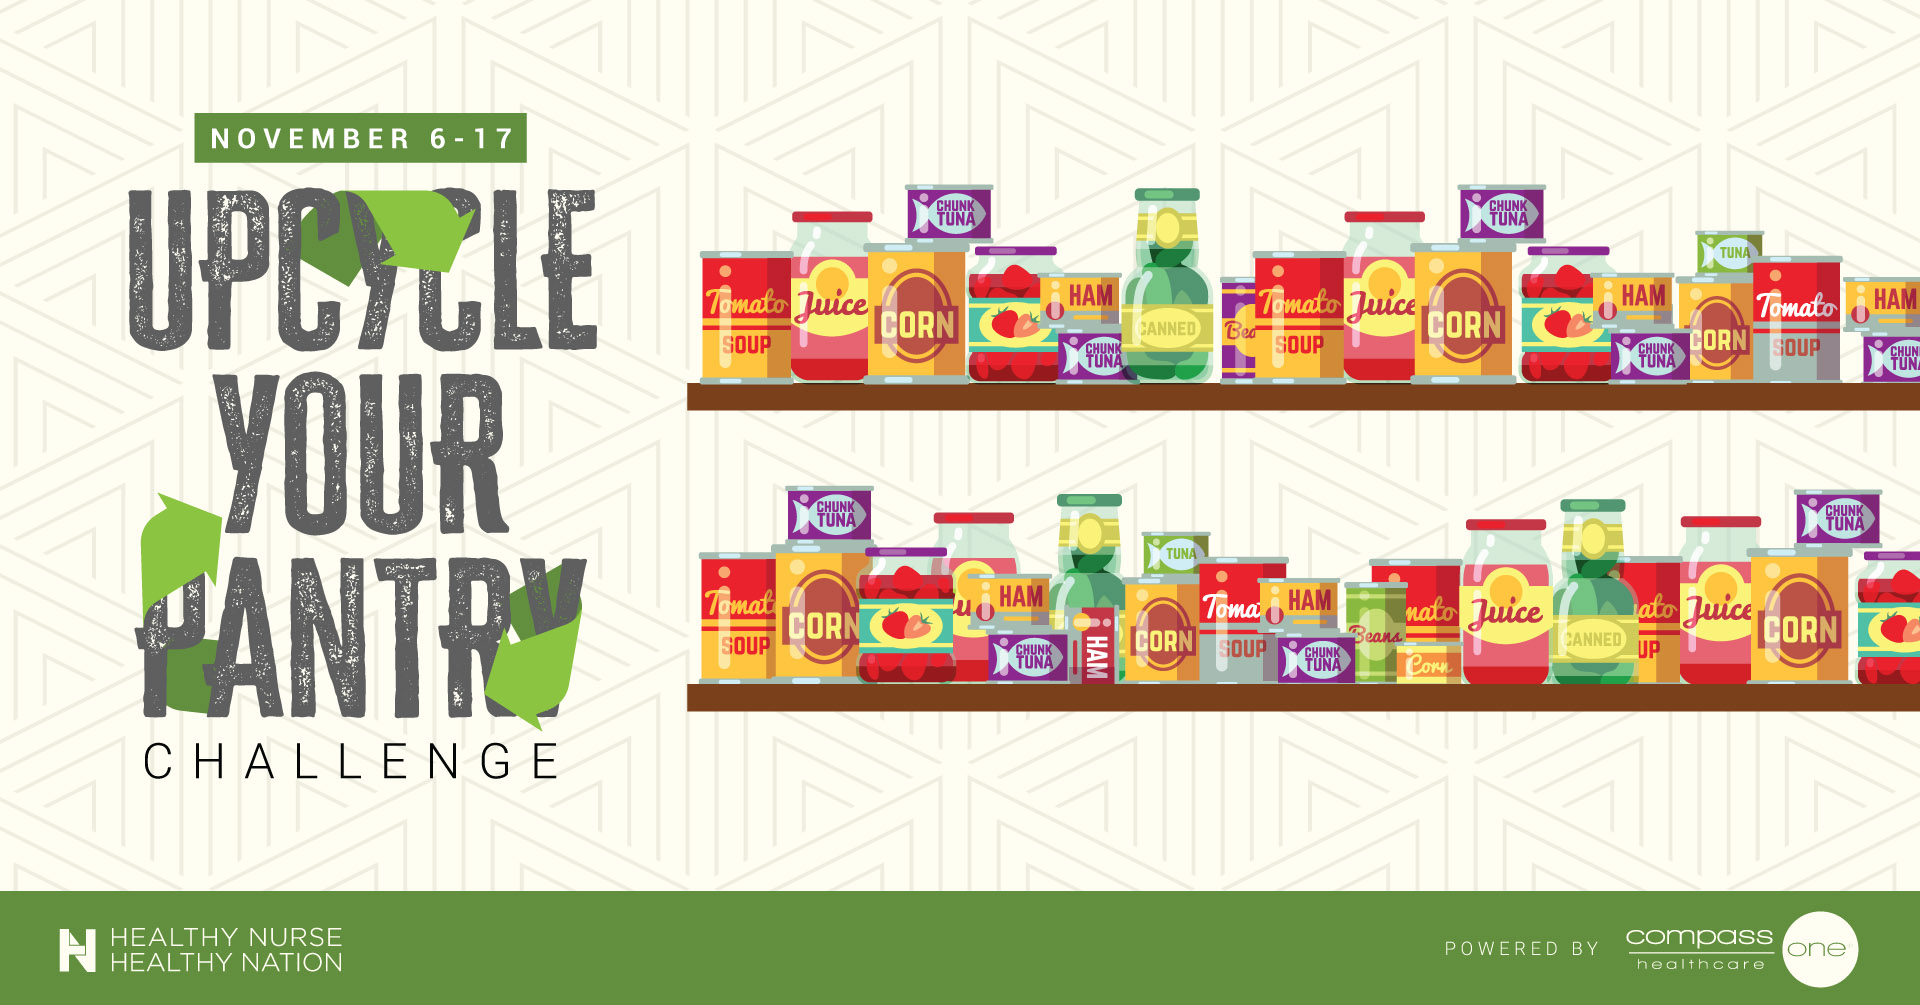 Upcycle Your Pantry, powered by Morrison Healthcare, a Division of Compass One Healthcare 93